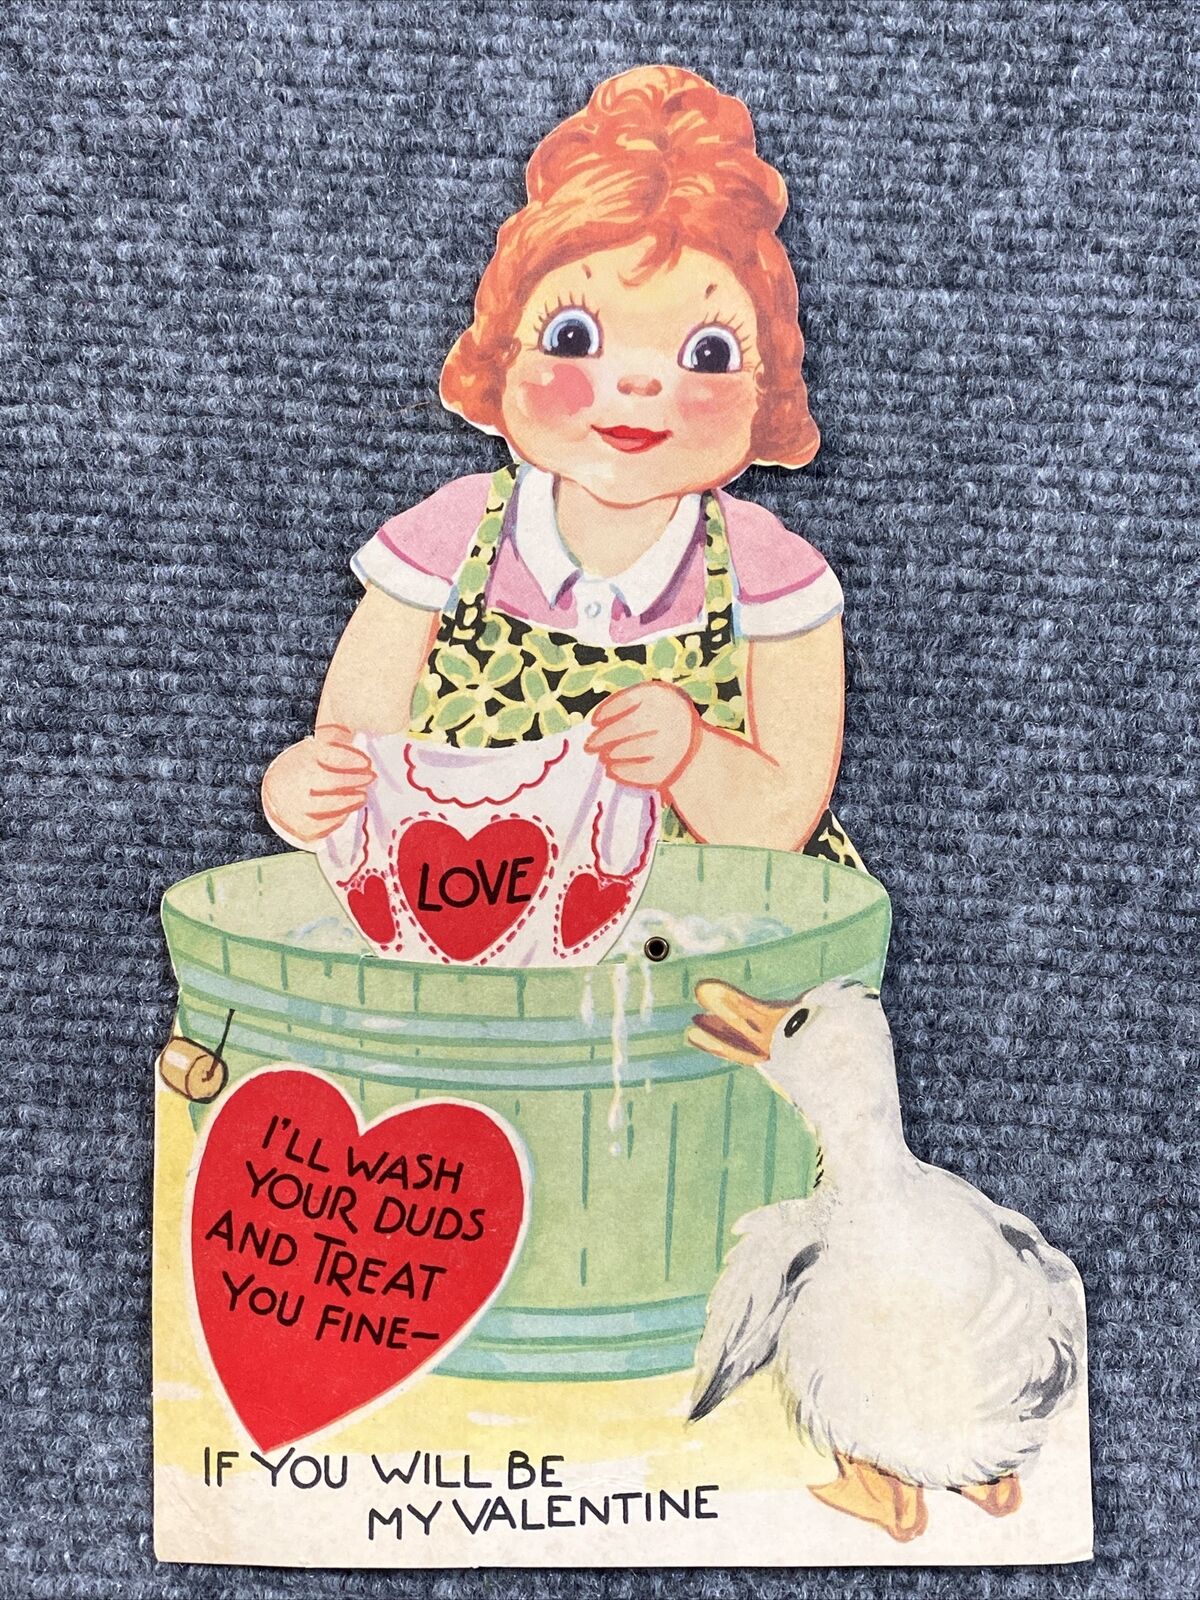 Vintage Valentine Card Girl Laundry Washtub Duck Mechanical Ill Wash Your Duds